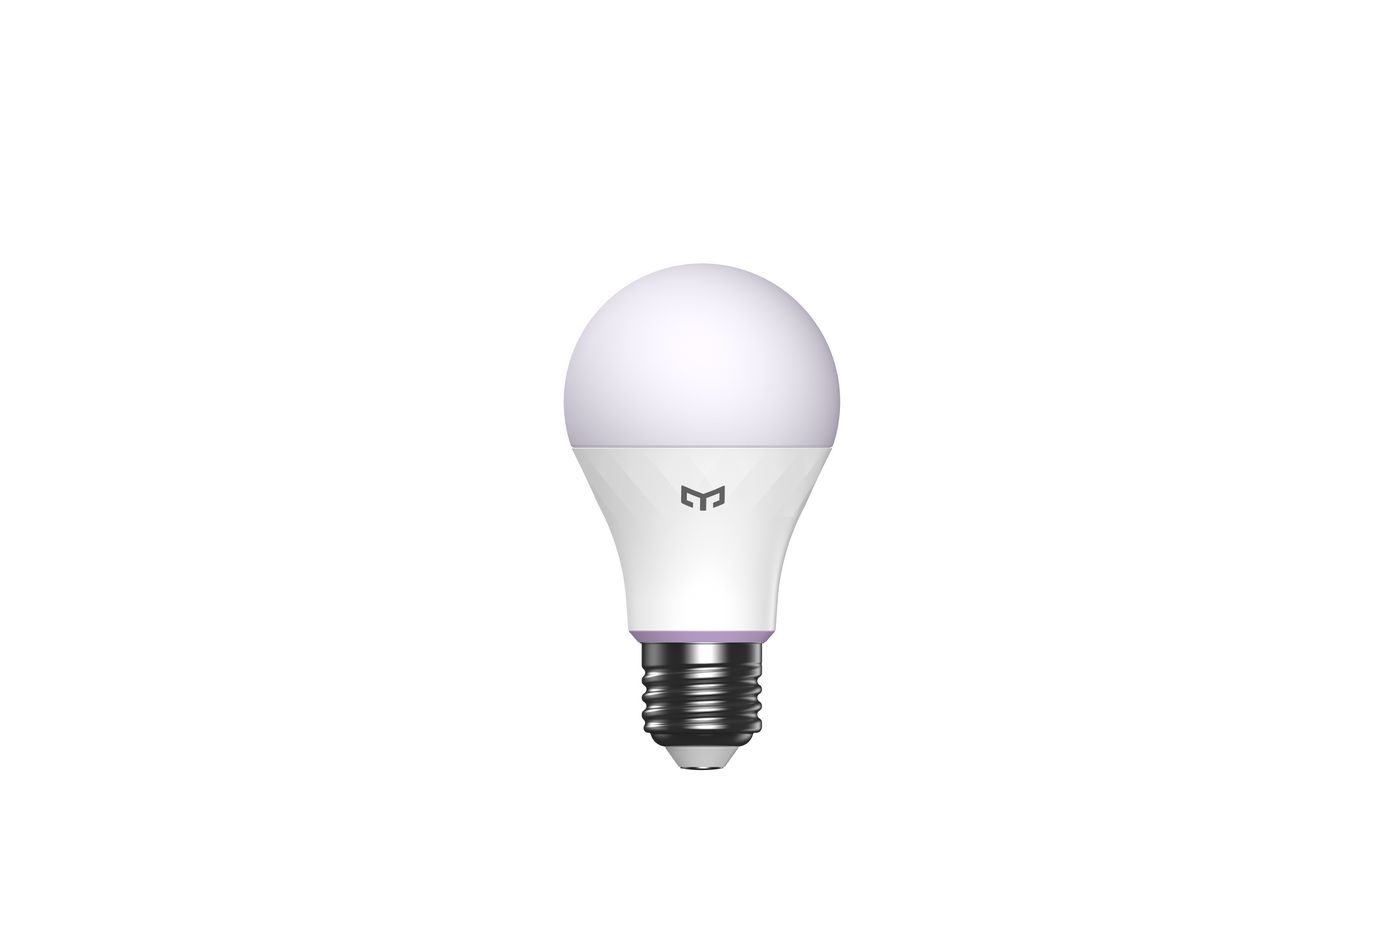 Photos - Other for Computer Xiaomi Yeelight Smart LED Bulb W4 YL00531 